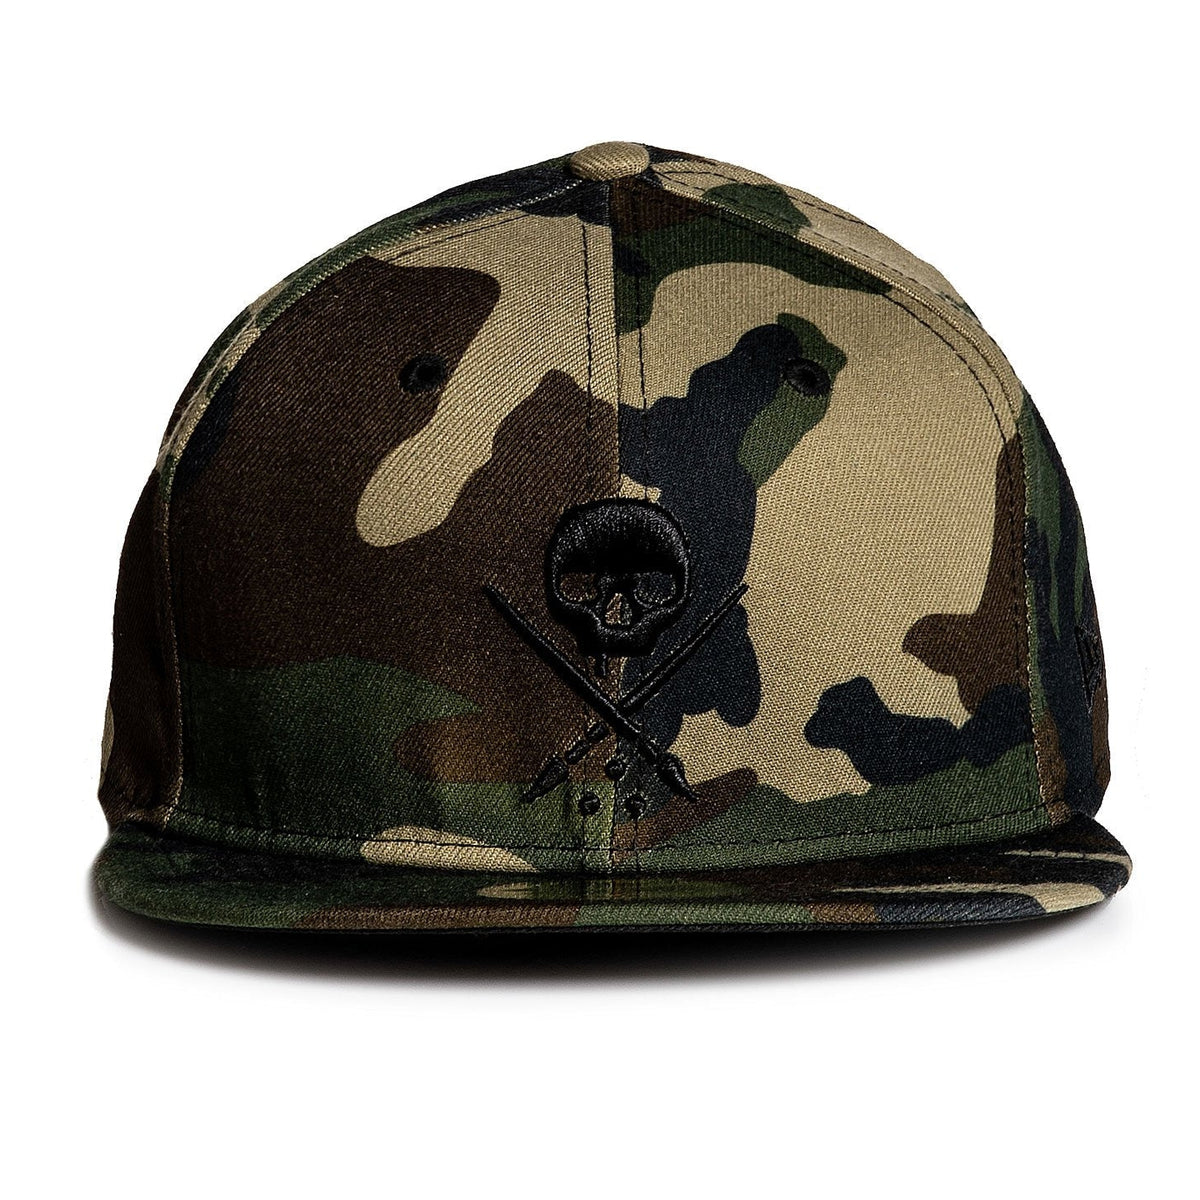 Sullen Badge Camo Stretched Fitted Cap-Mens Beanies, Hats &amp; Snapback Caps-Scarlett Dawn